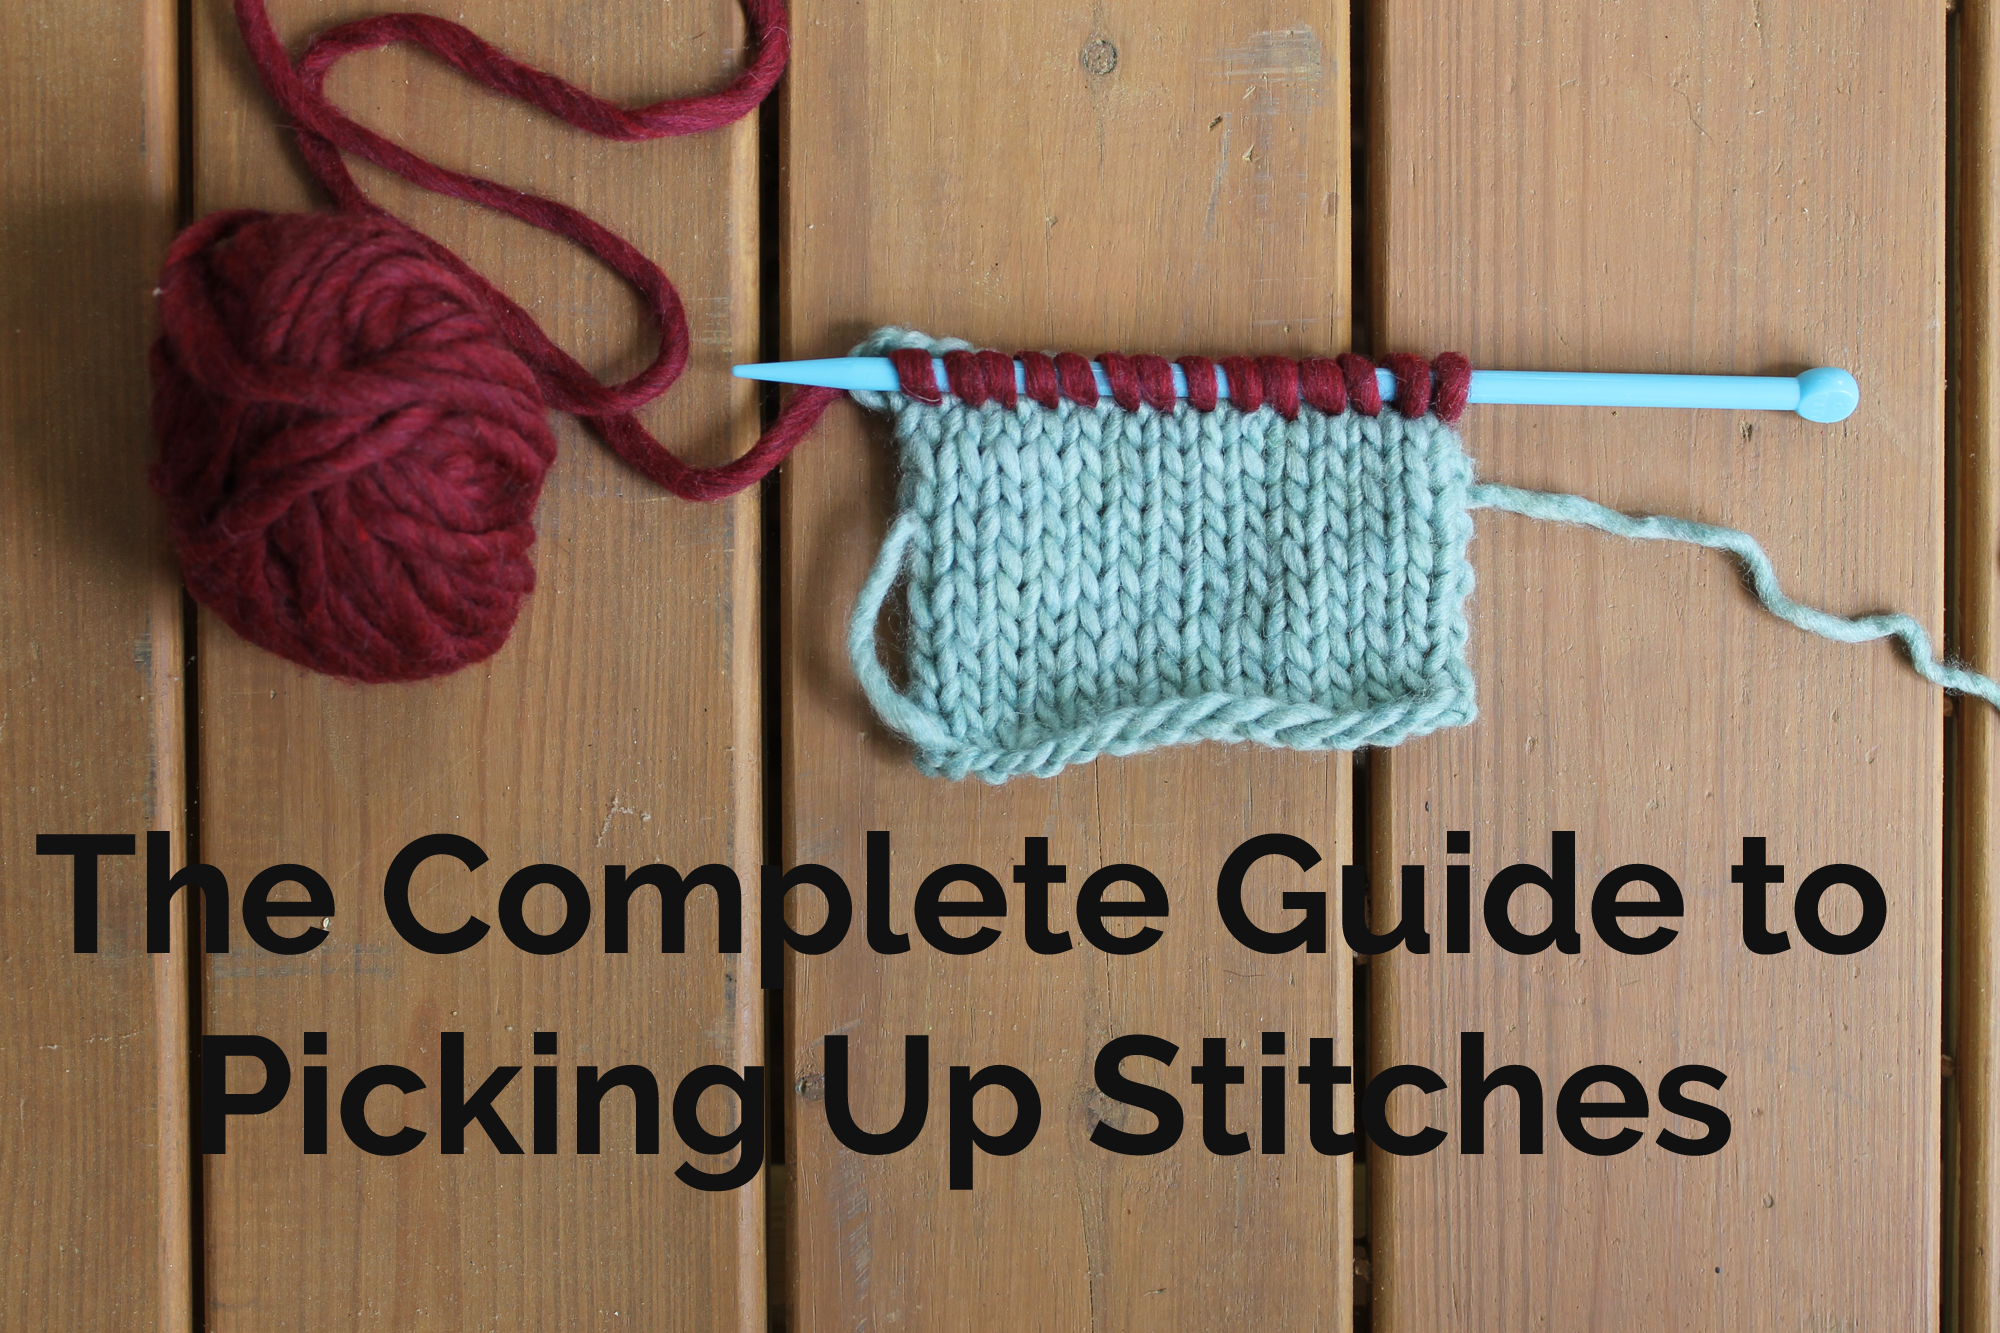 Guide to Picking Up Stitches